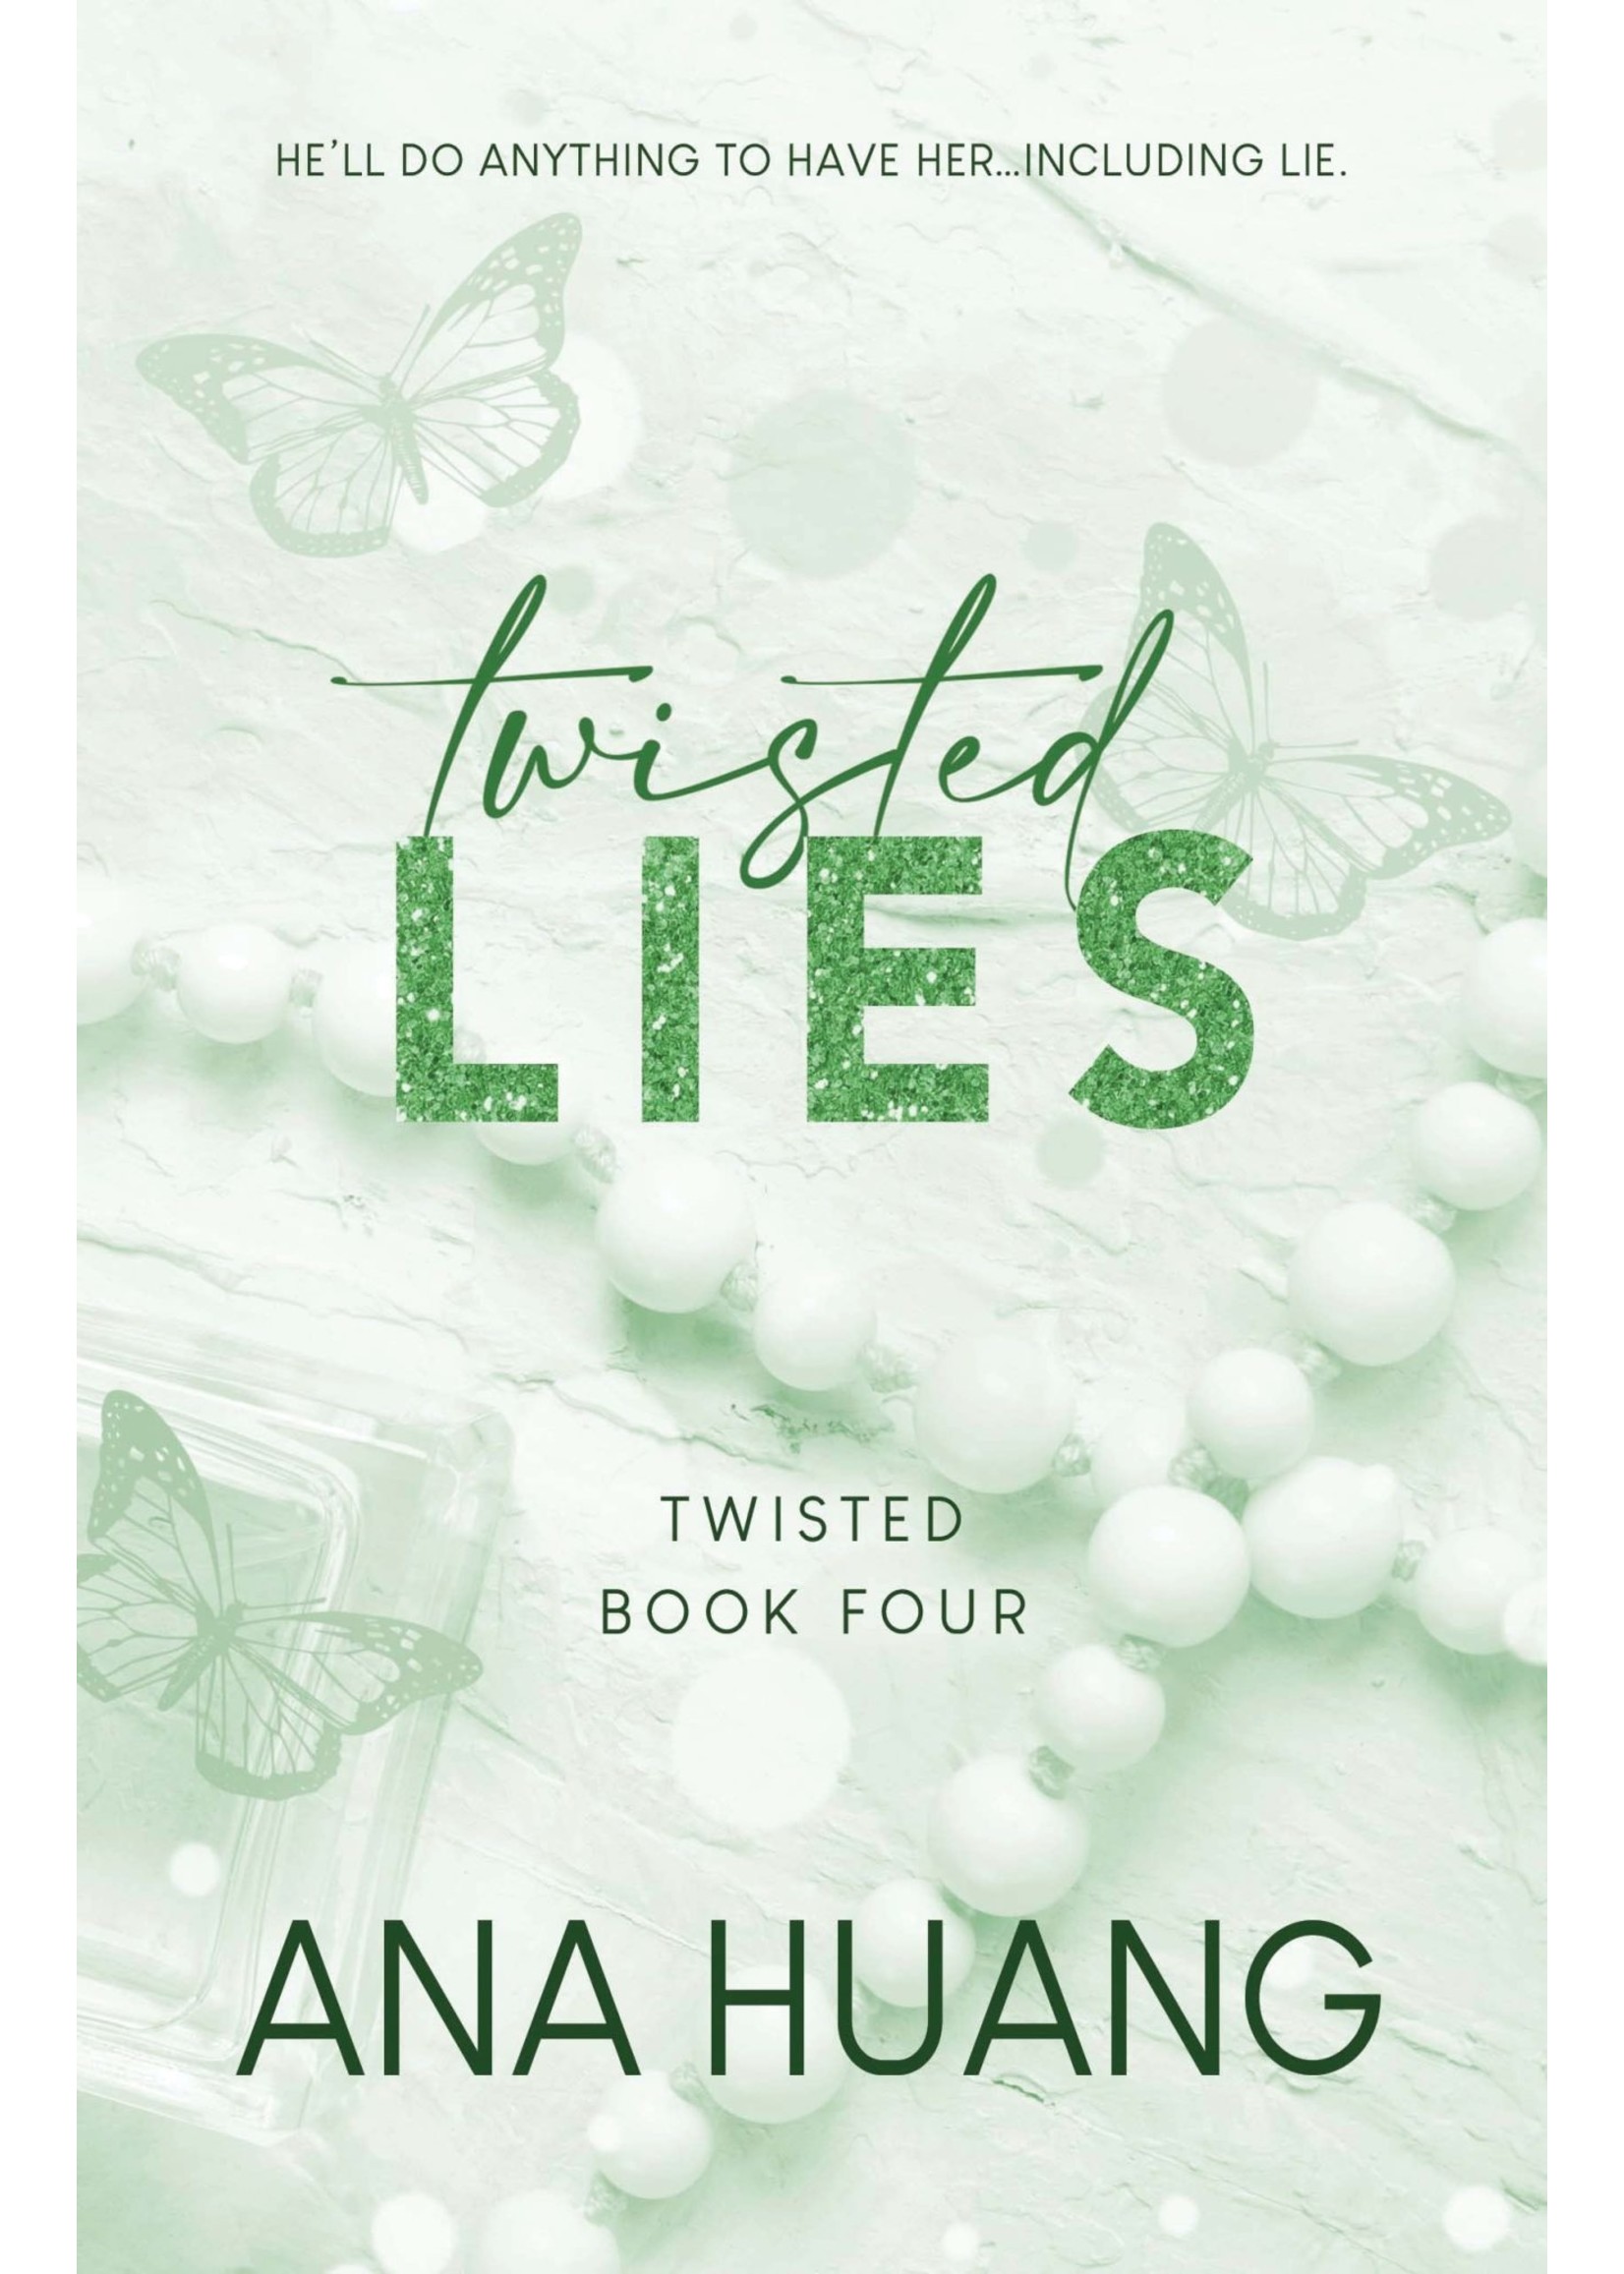 Twisted Lies (Twisted #4) by Ana Huang